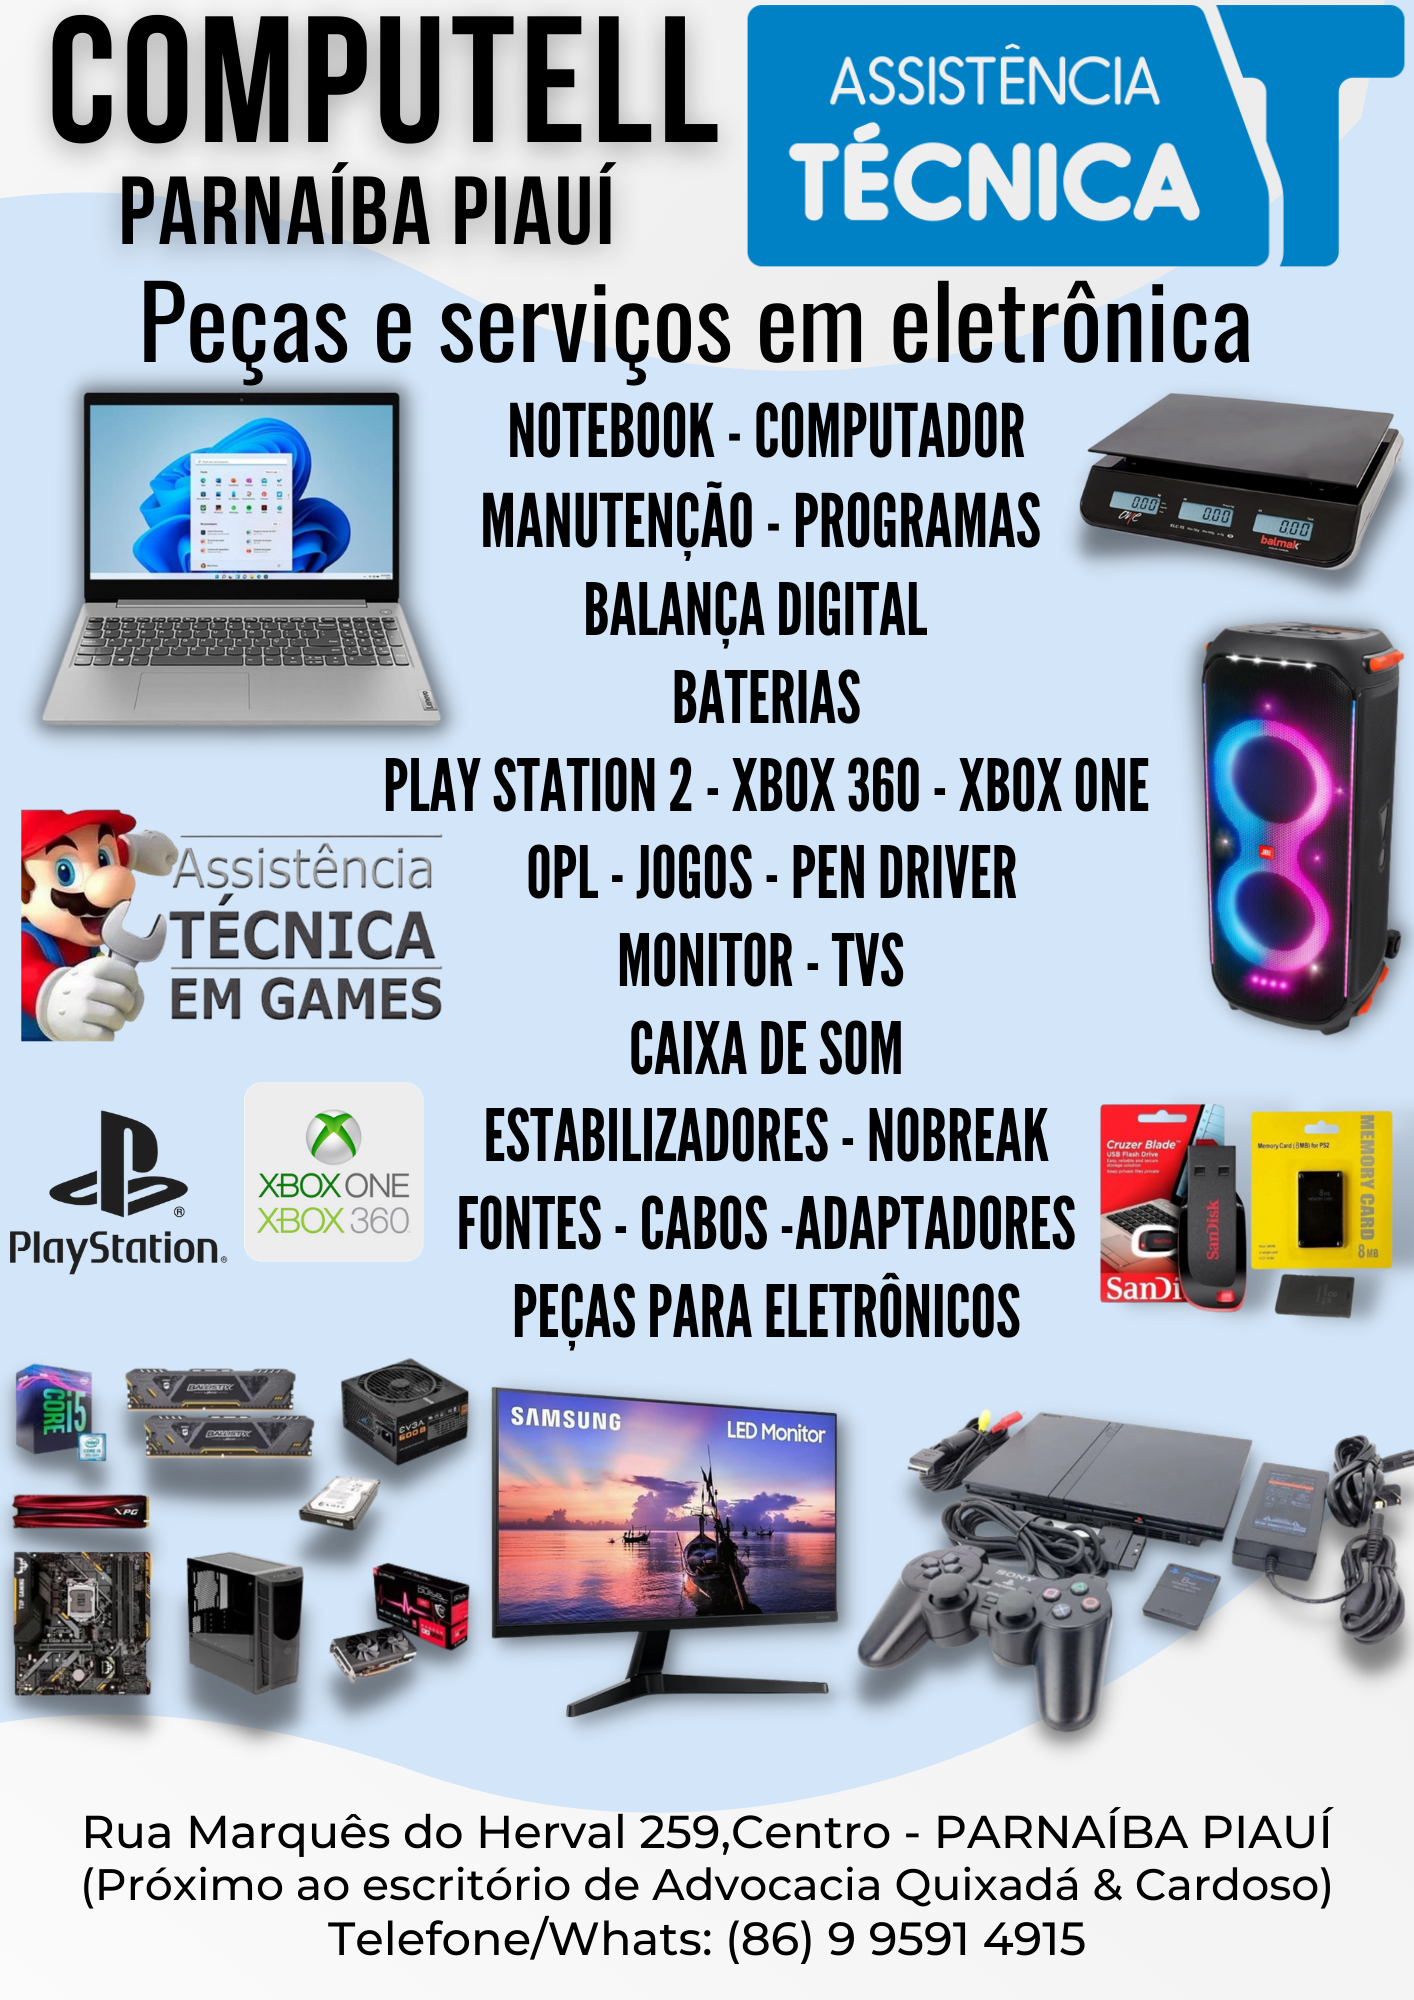 NOW PlayTV by Now Solucoes Tecnologicas - EIRELI